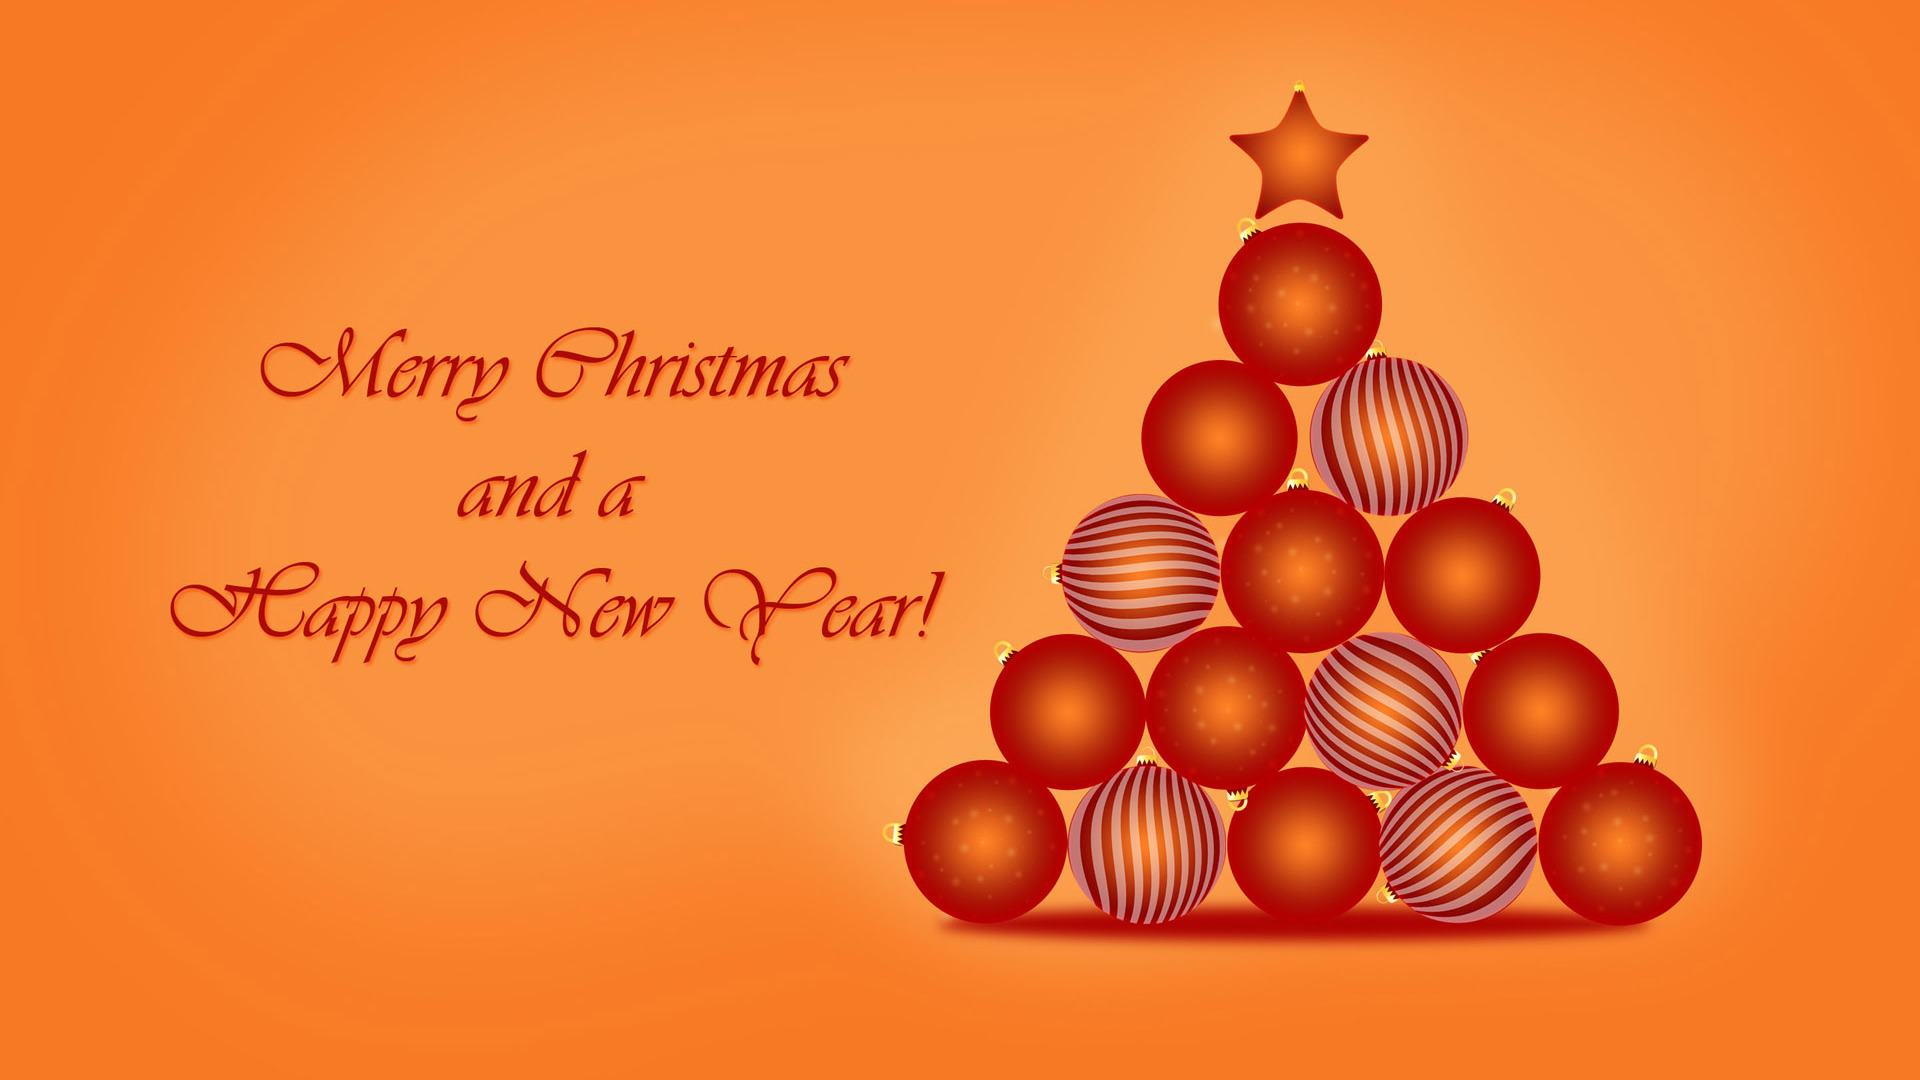 Christmas And Happy New Year Hd Wallpapers - Merry Christmas Orange Hd - HD Wallpaper 